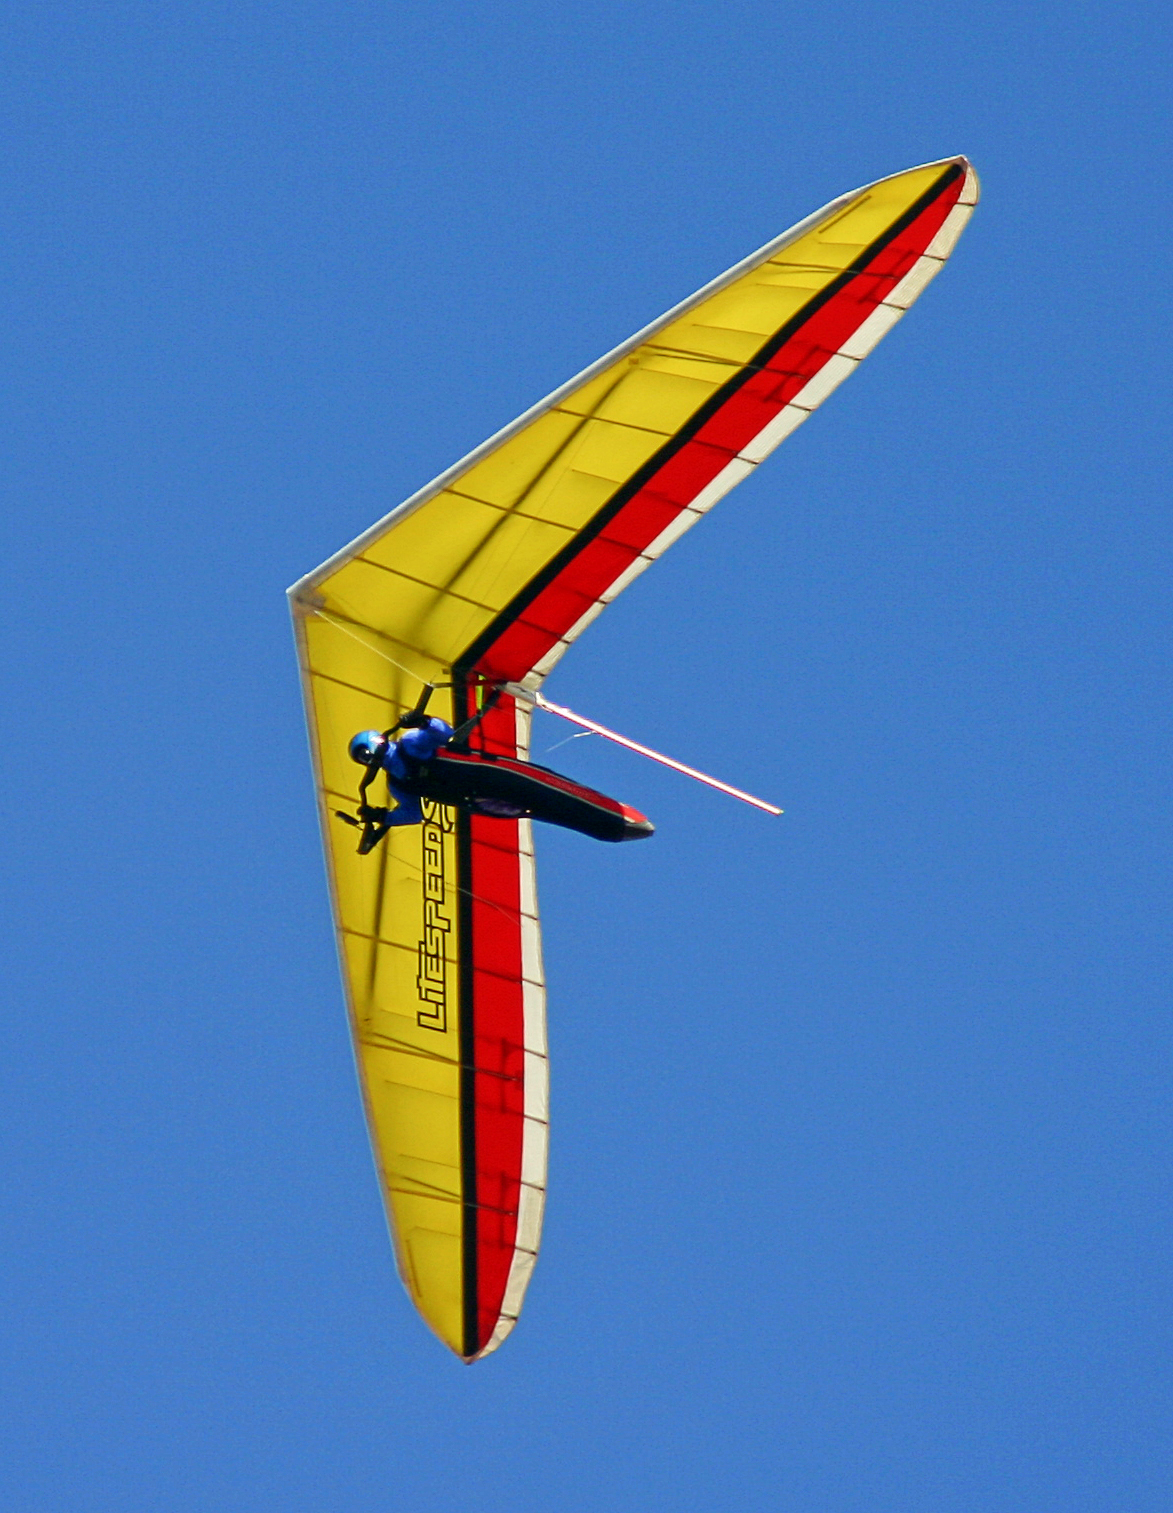 The Hang Glider Effect: an essay on flailing and soaring by Amy Truncale